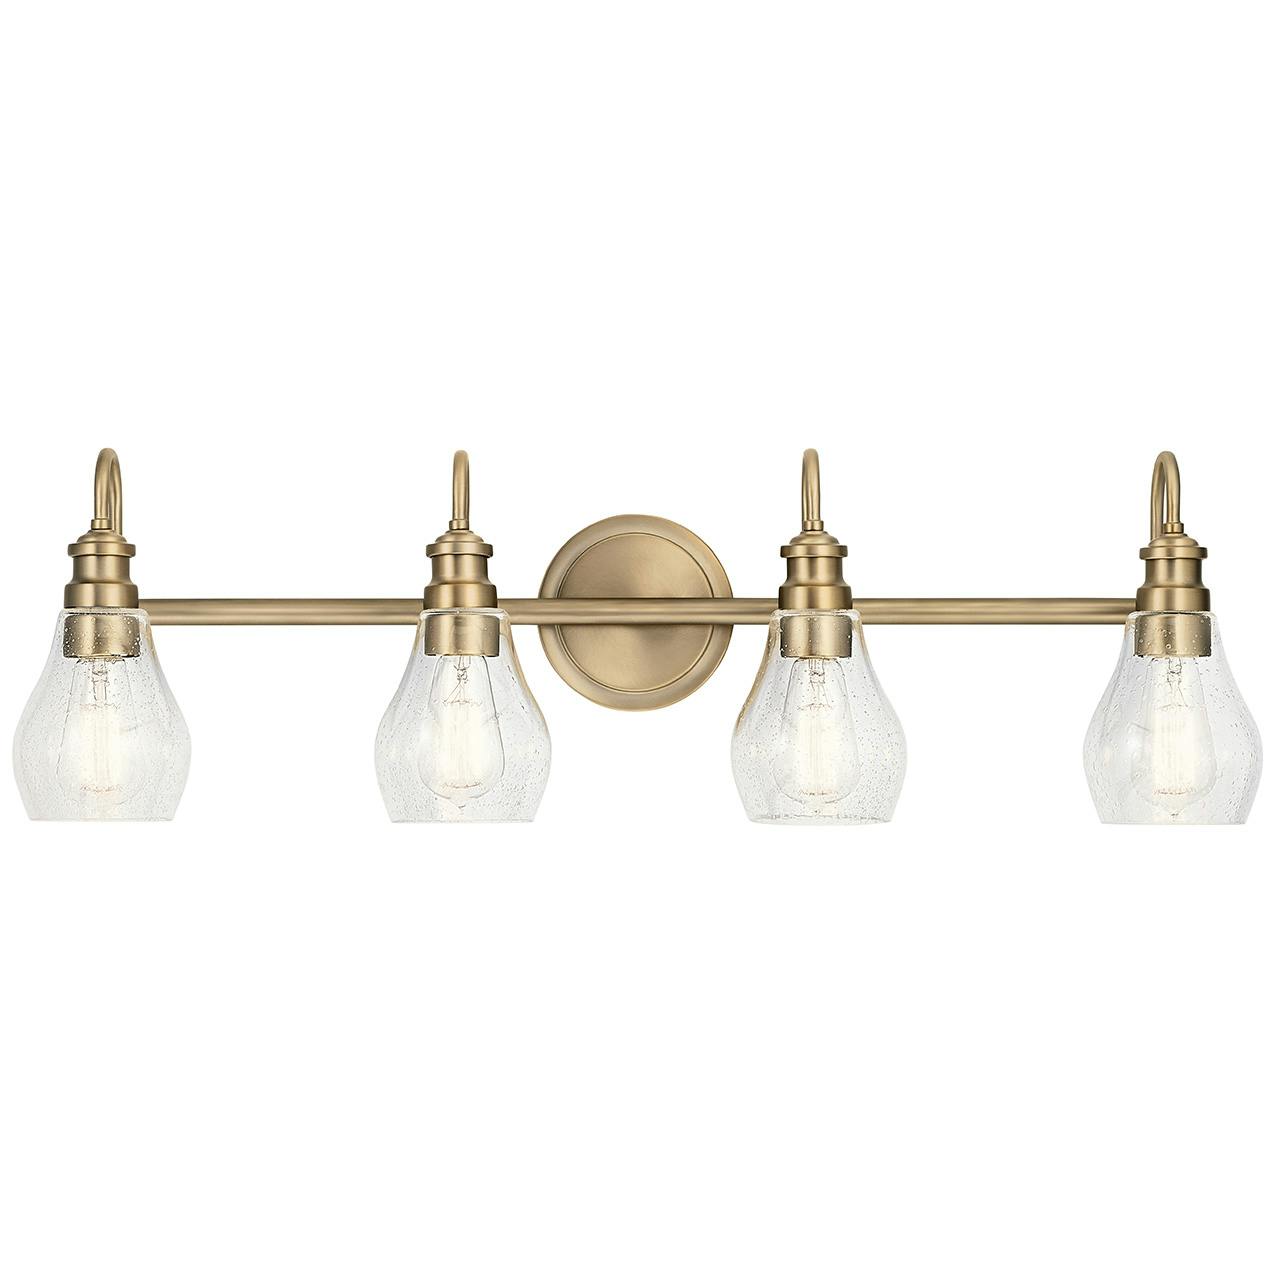 The Greenbrier 4 Light Vanity Light Bronze facing down on a white background